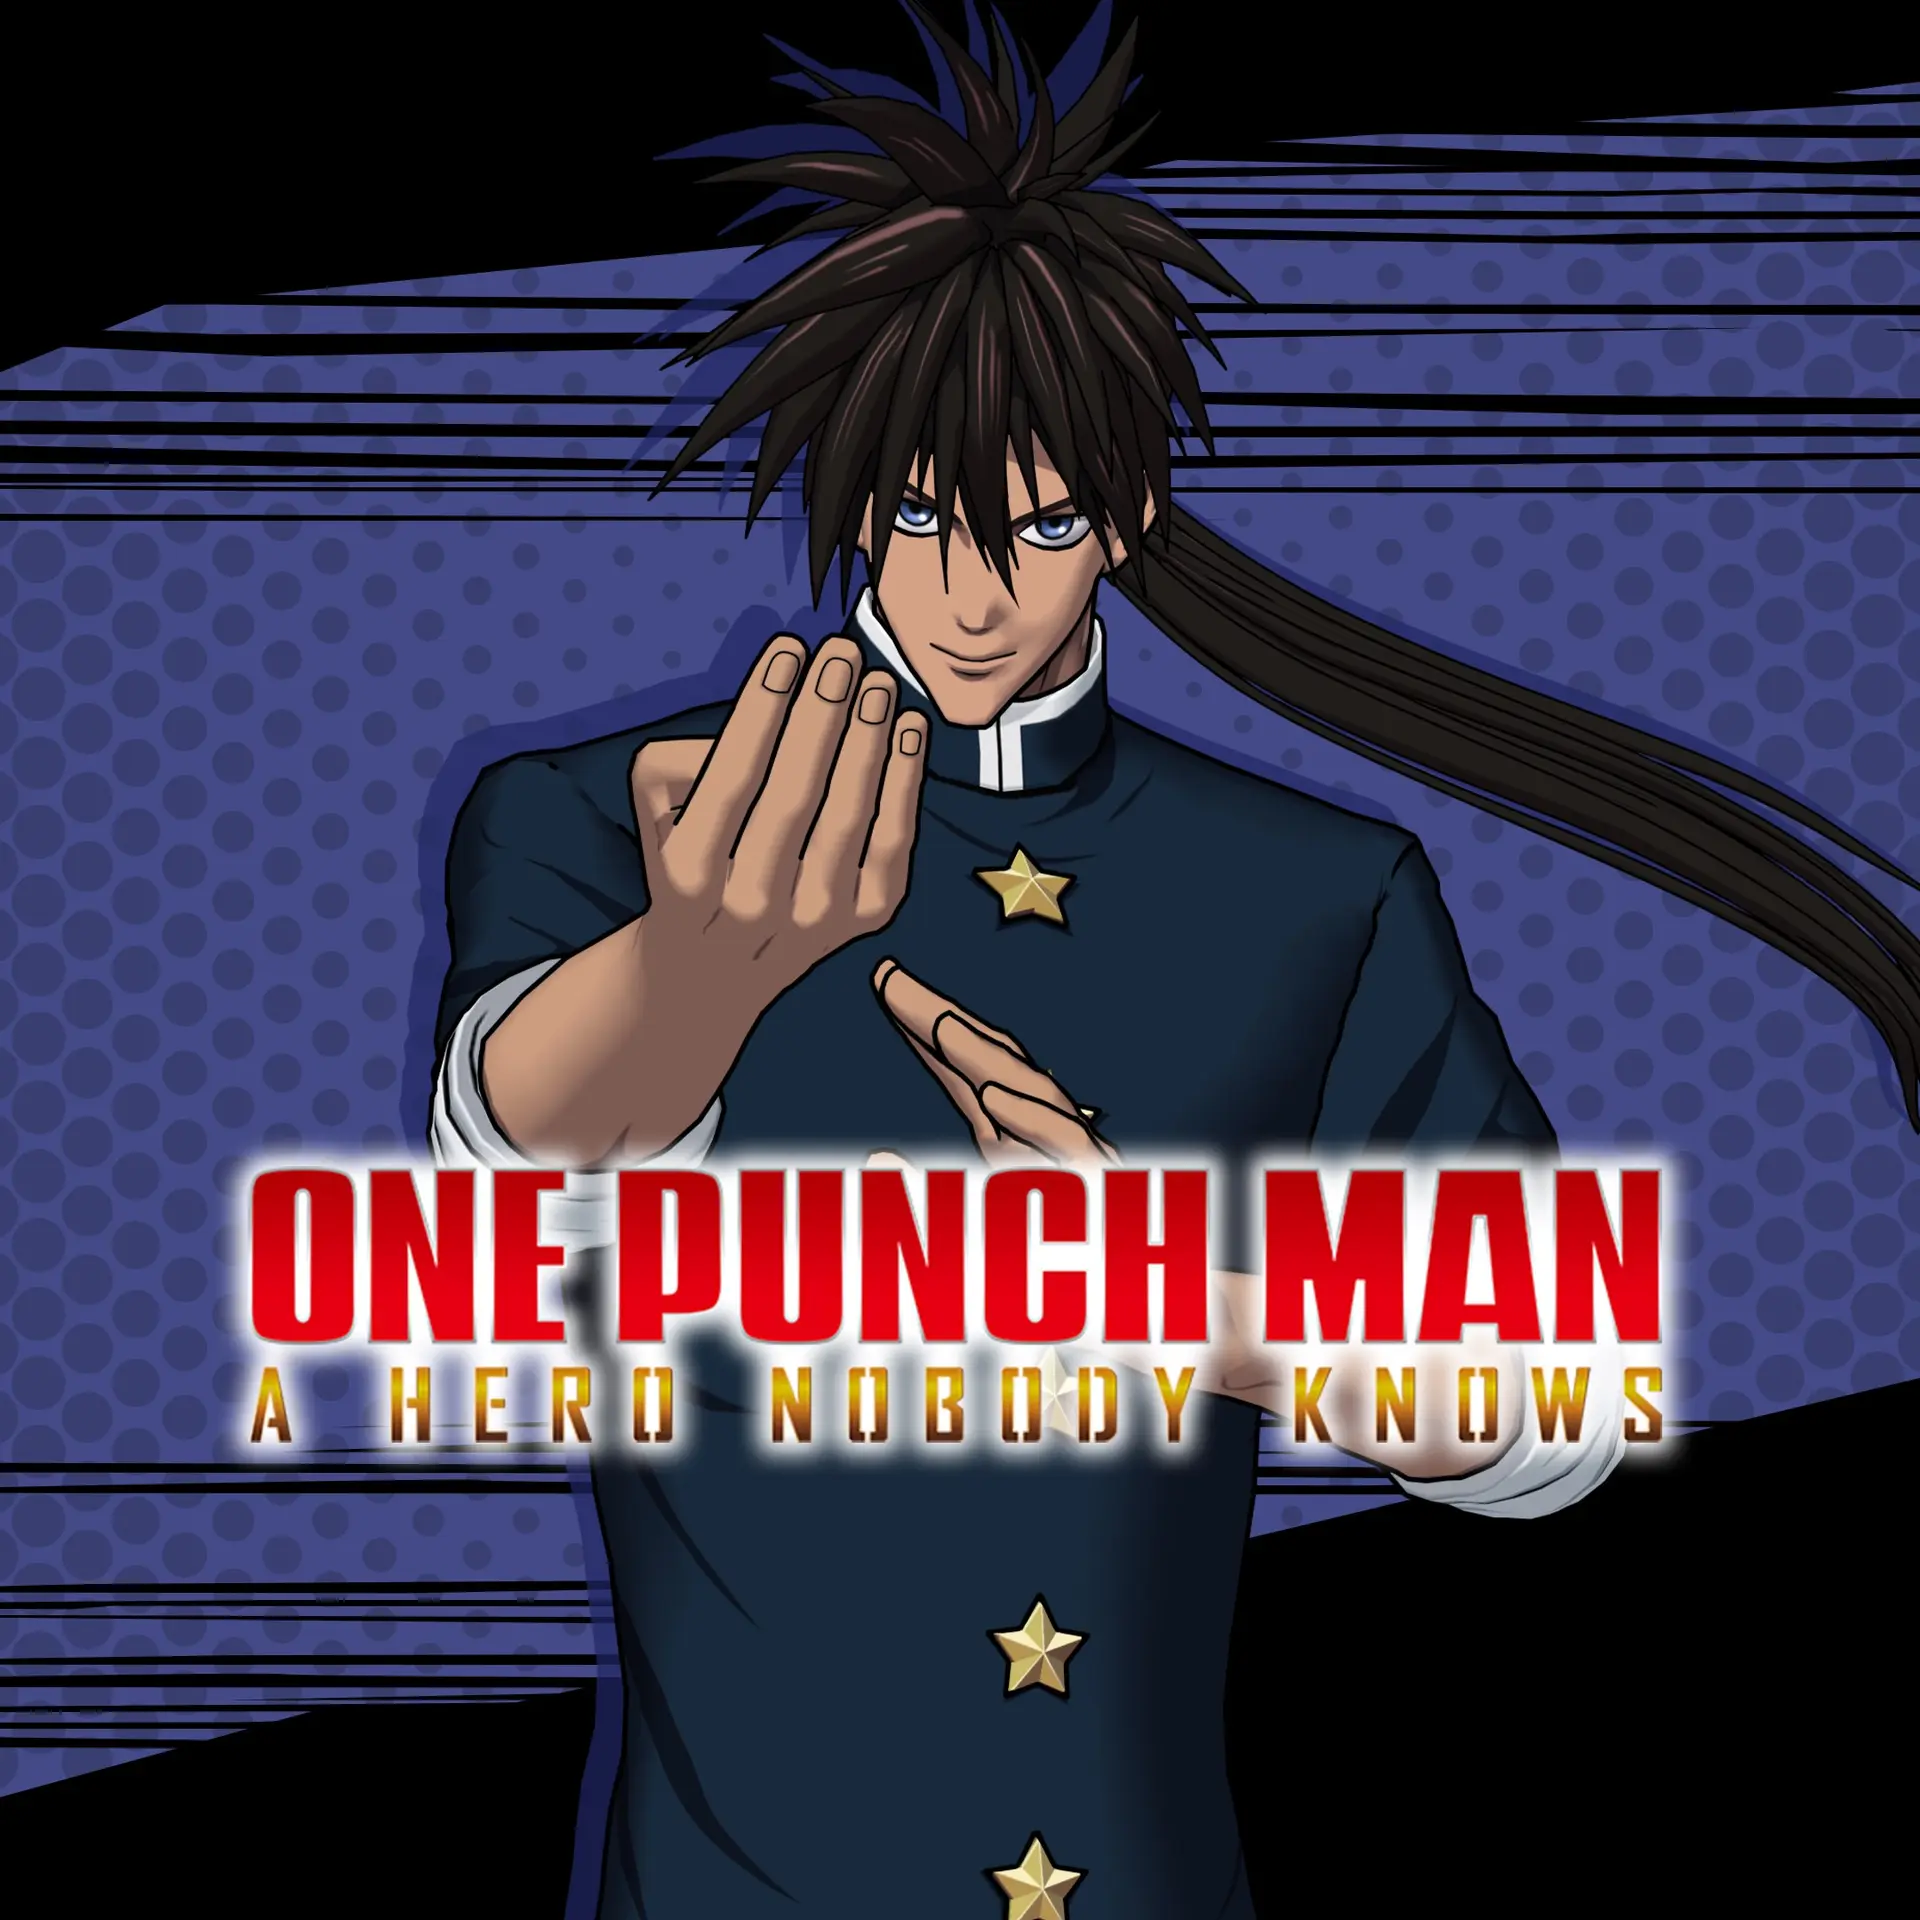 ONE PUNCH MAN: A HERO NOBODY KNOWS DLC Pack 1: Suiryu (Xbox Games US)